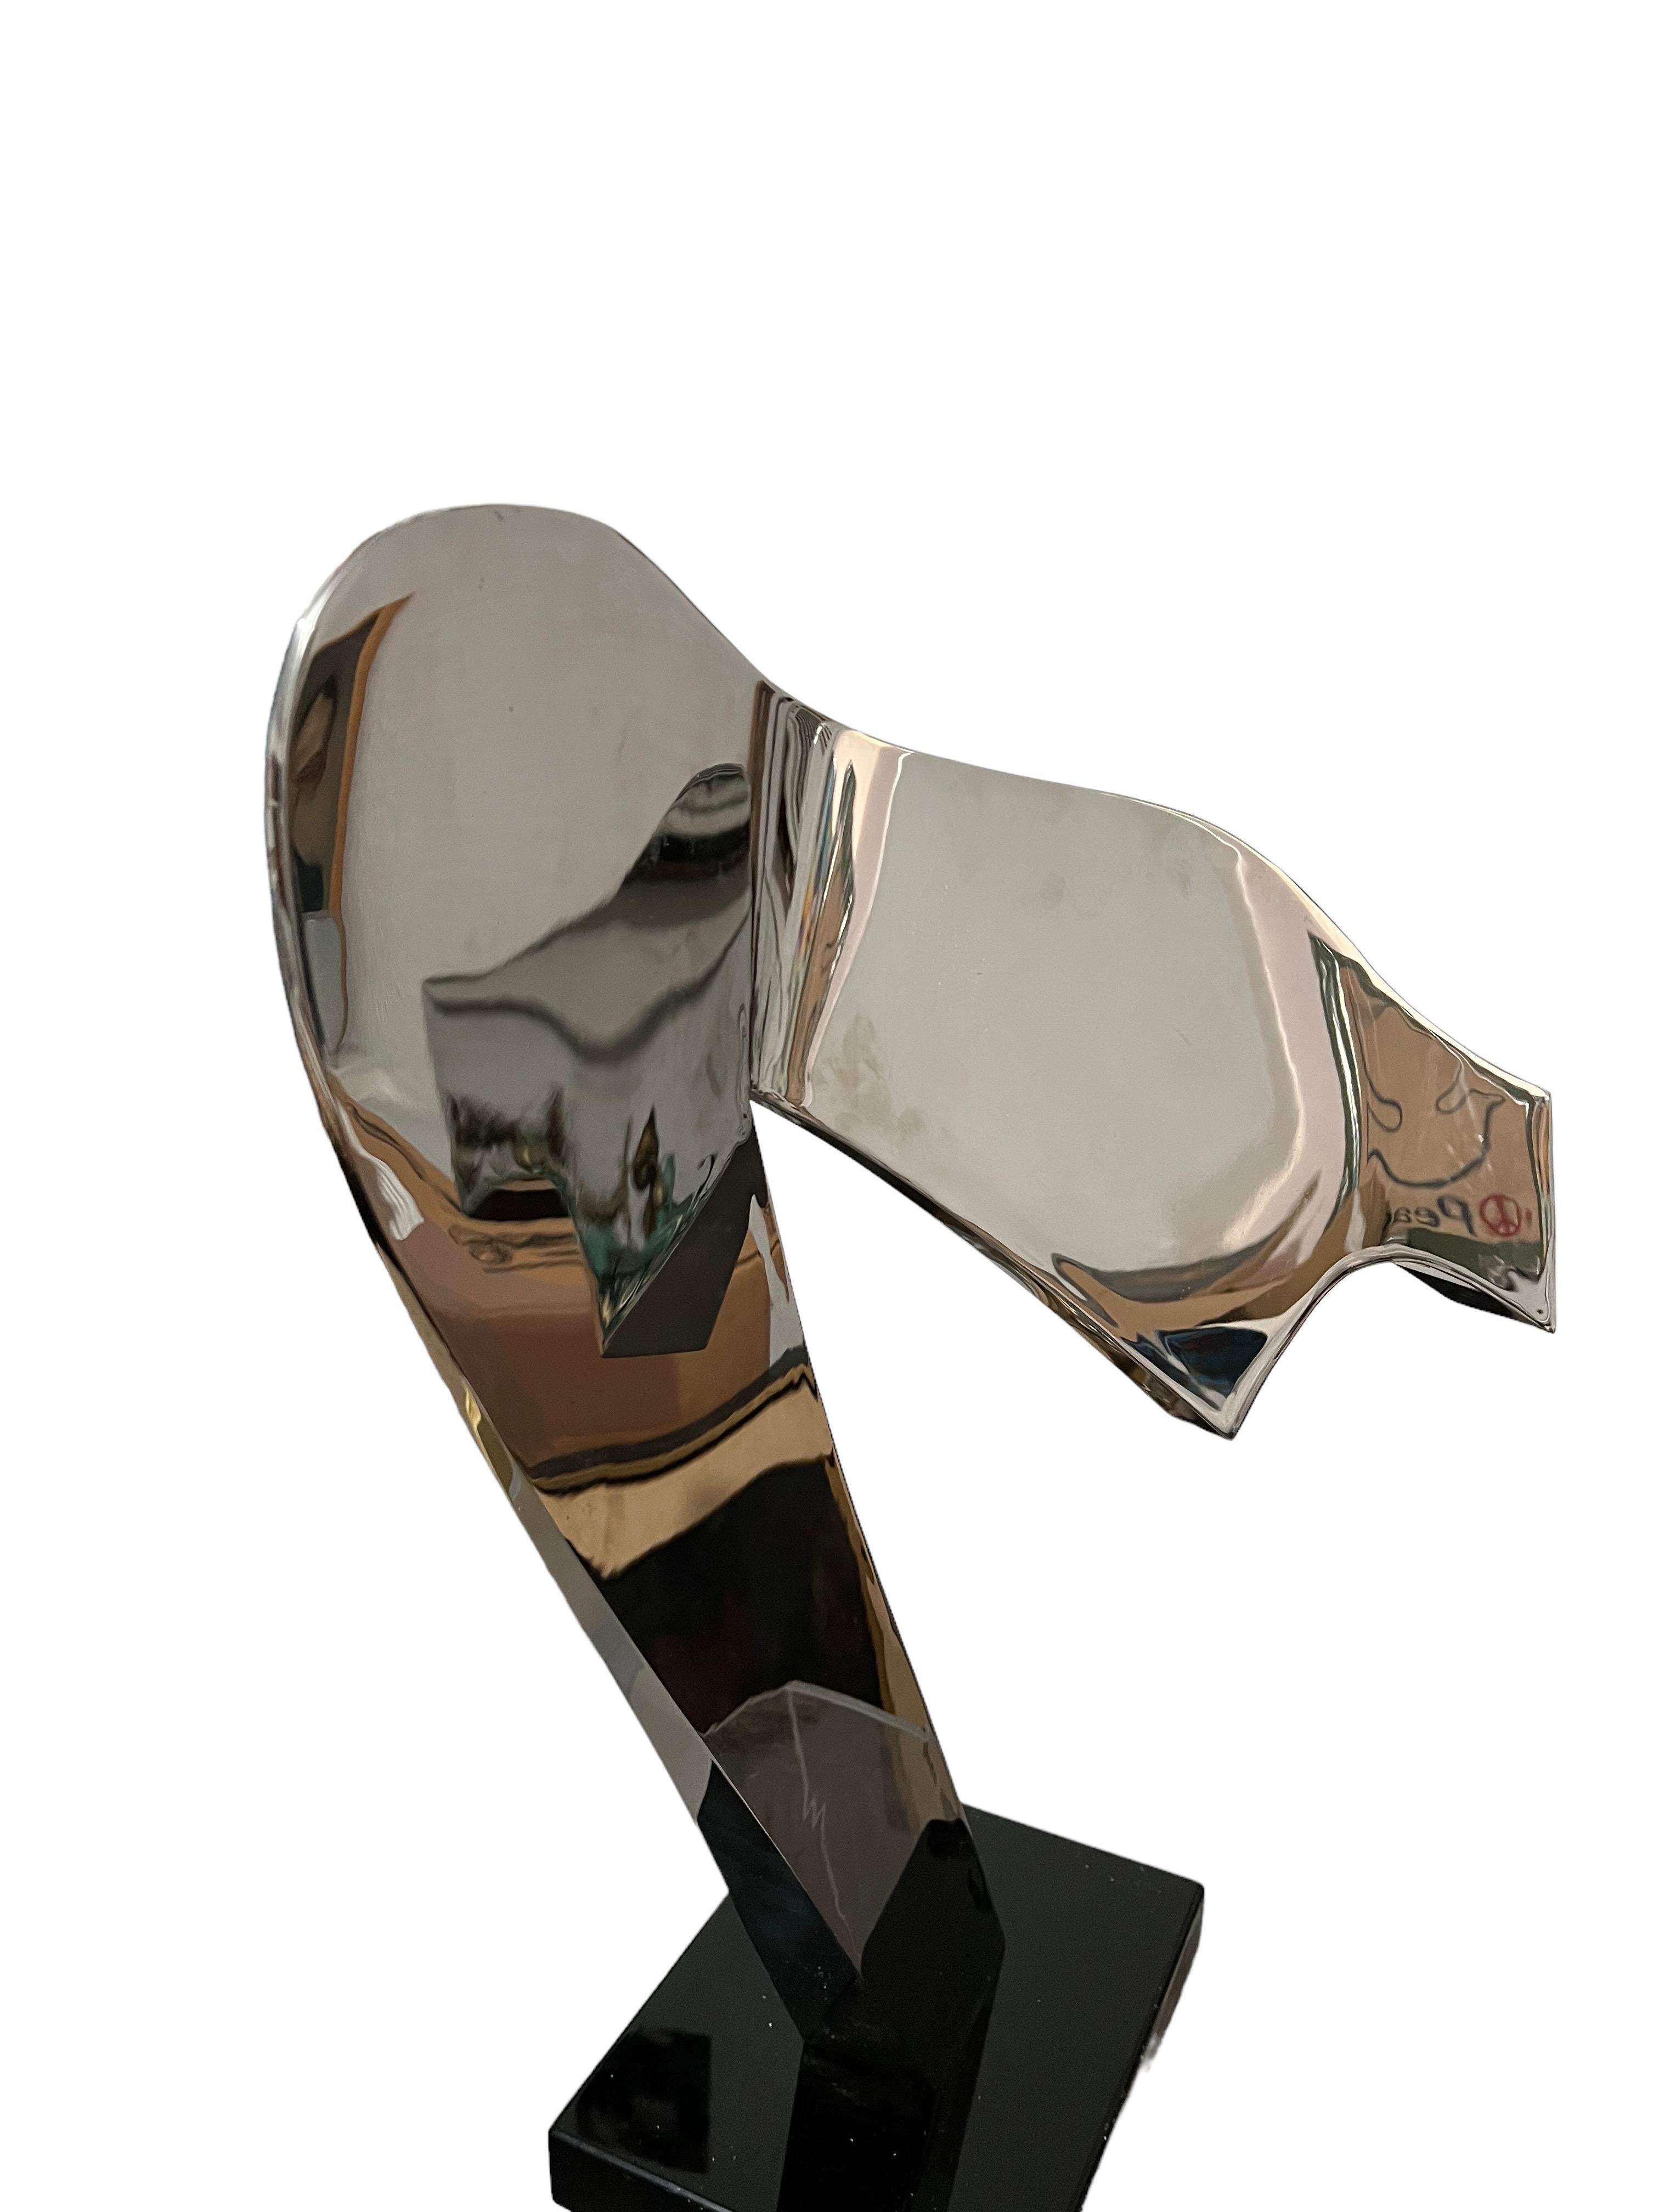 Welded Stainless Steel Reflective Abstract Modernist Sculpture Gary Kahle For Sale 15